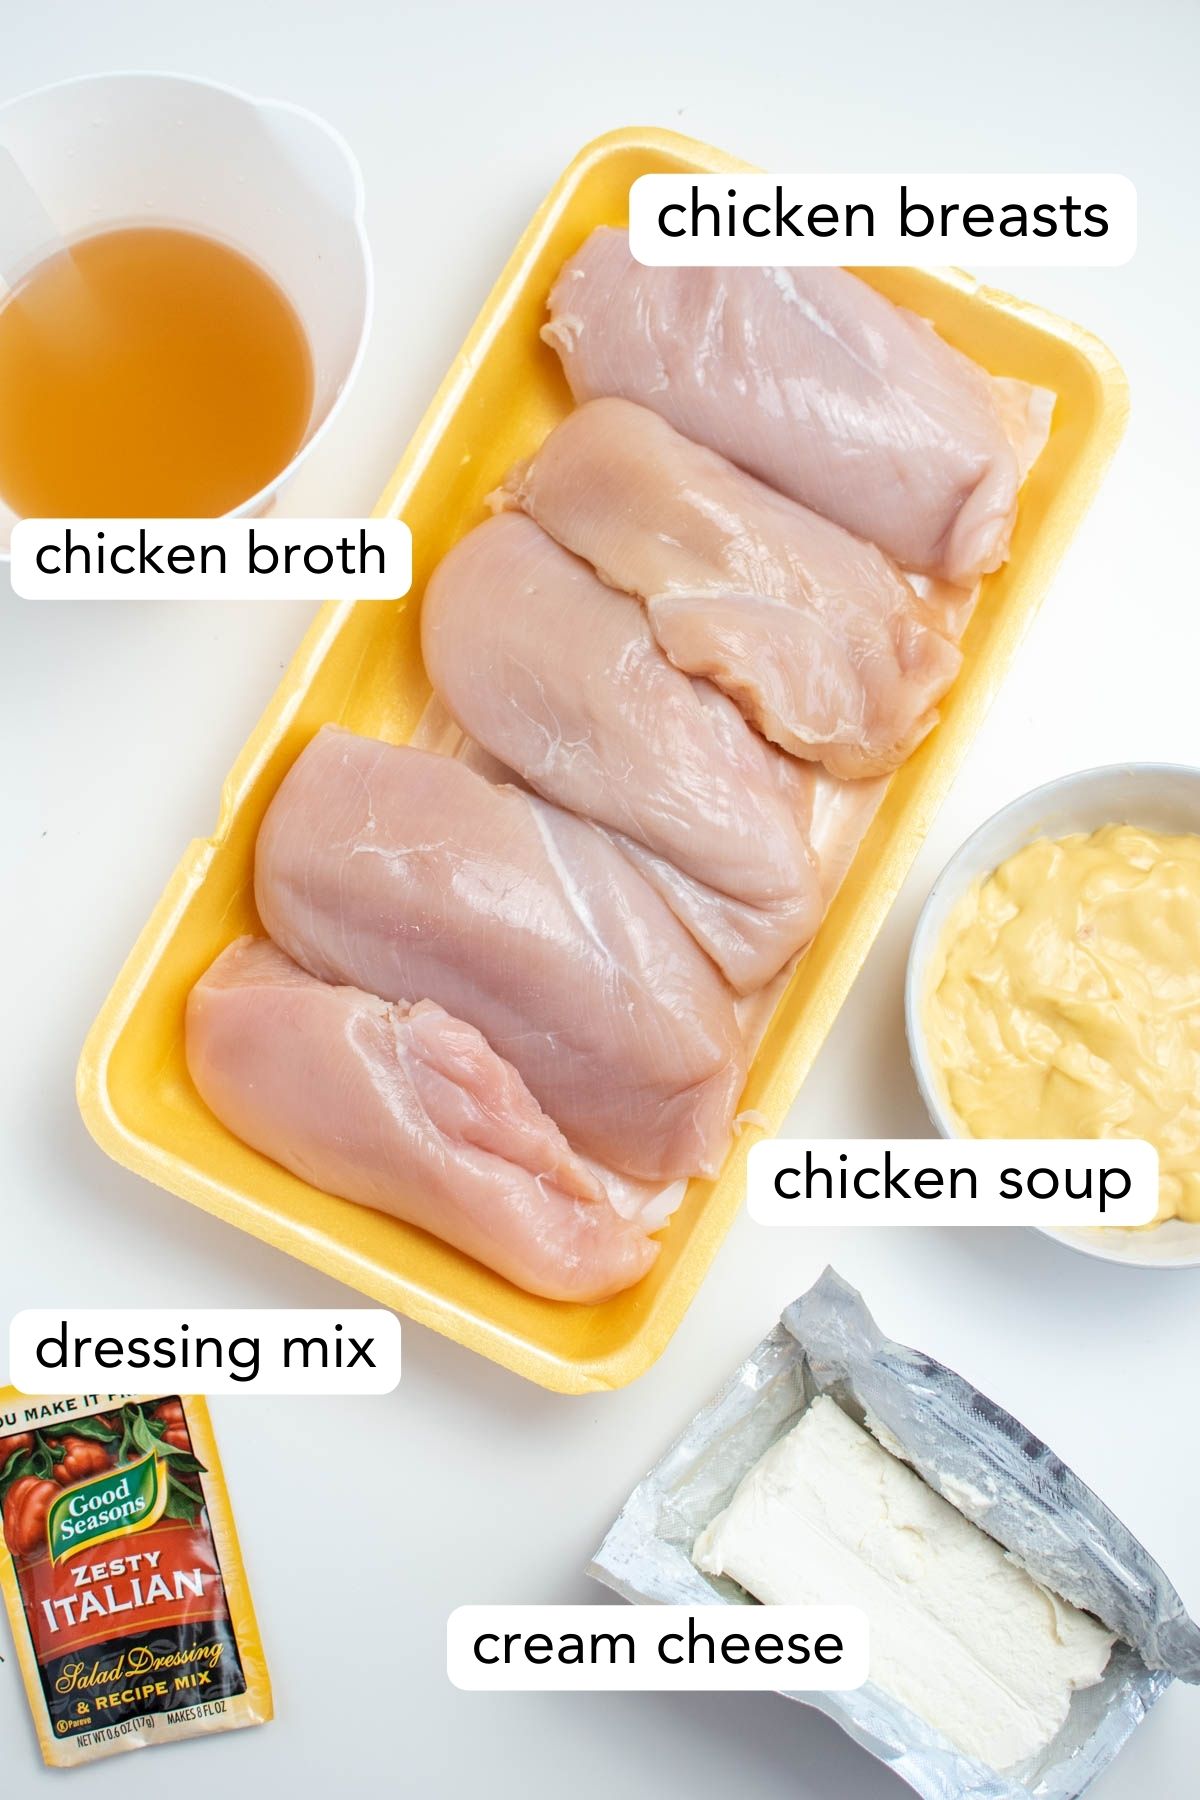 Labeled photo of creamy Italian chicken ingredients including chicken breasts, cream cheese, and chicken broth.